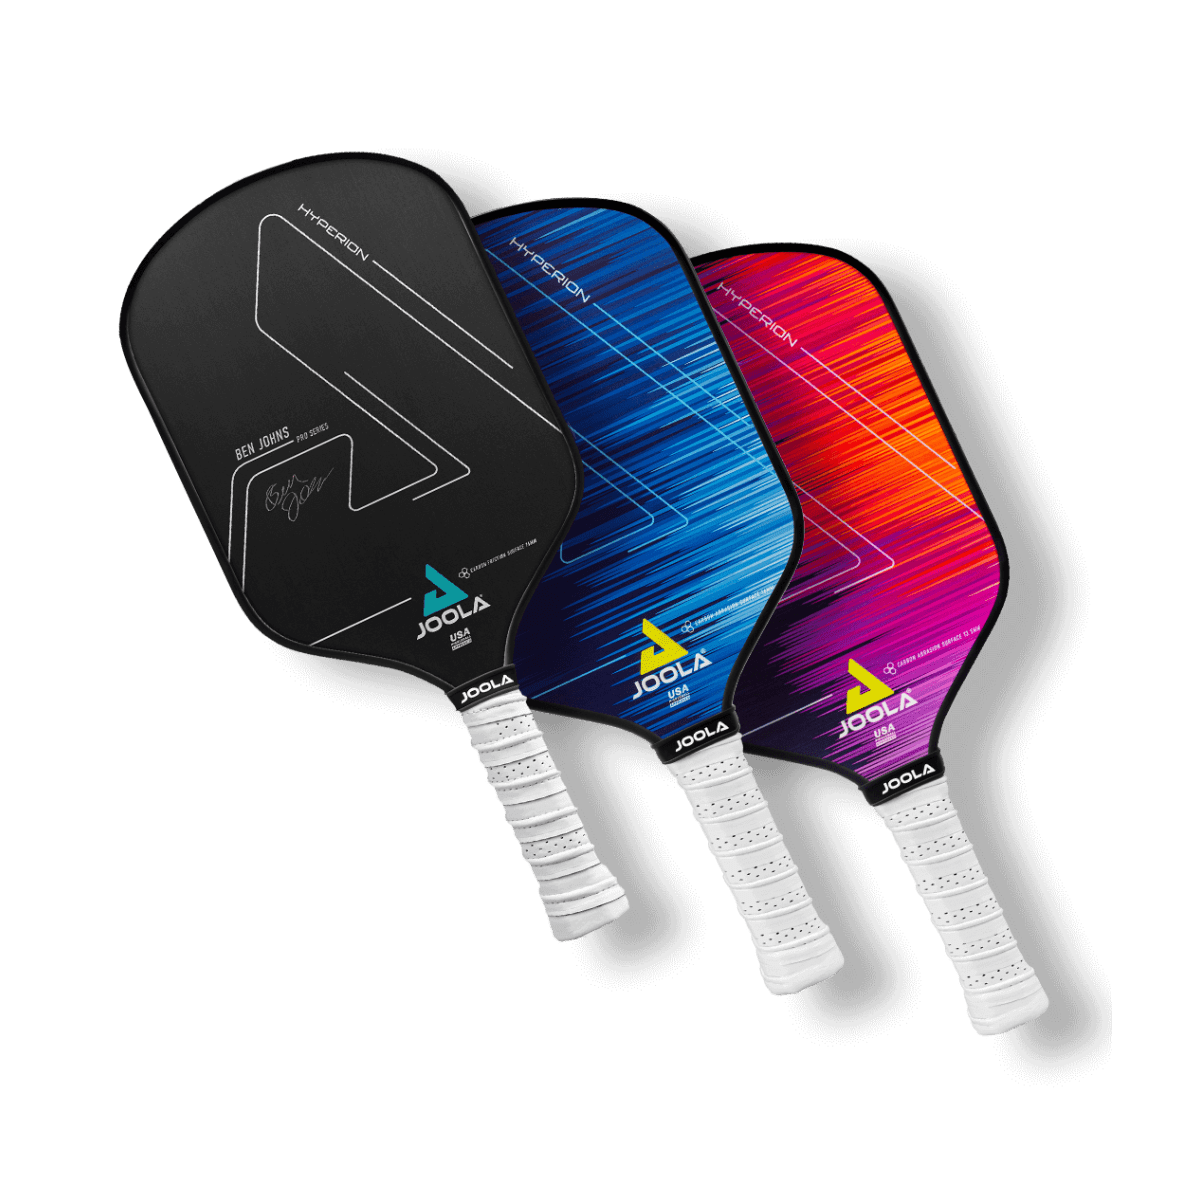 Luxx Air Pro , One of the most popular Joola paddles is the Joola  Infinity Edge.